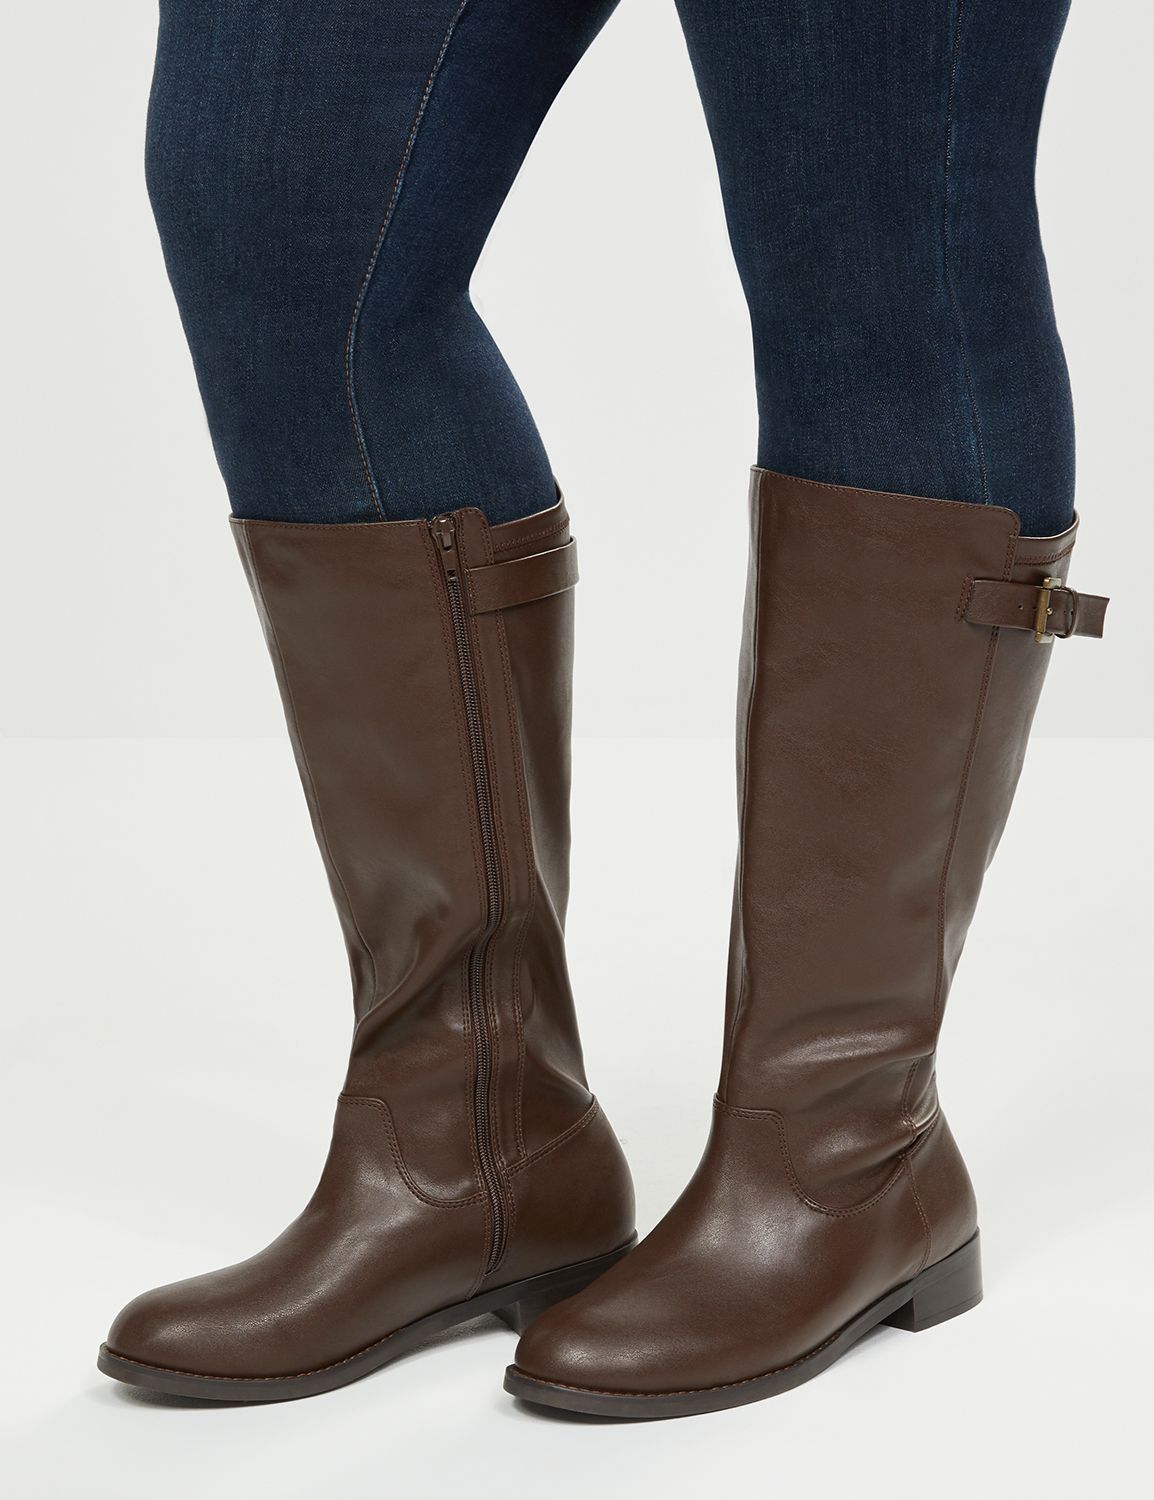 lane bryant boots clearance